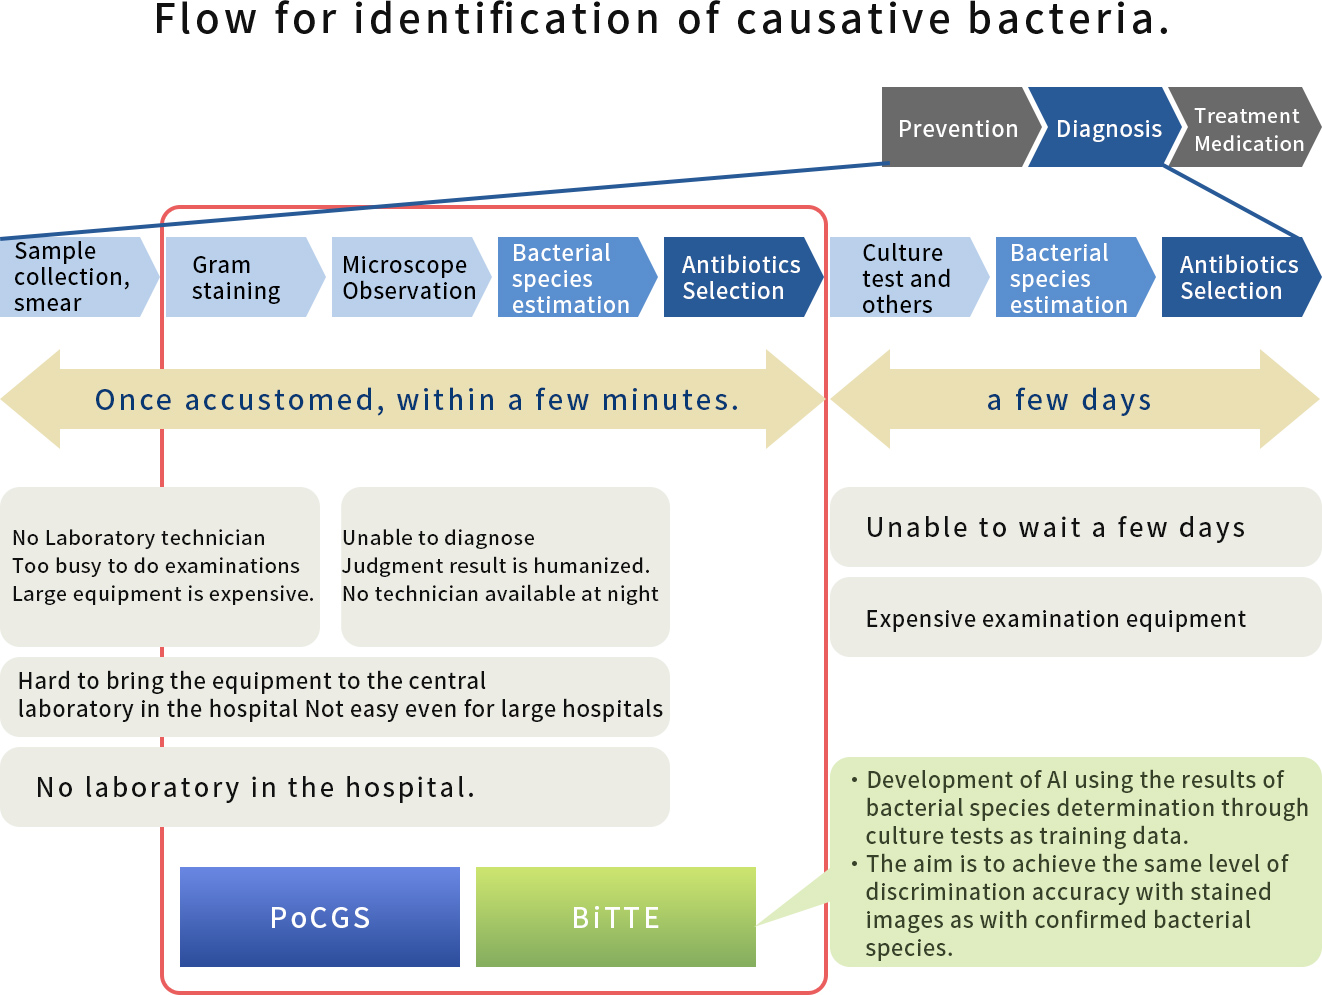 Flow for identification of causative bacteria.